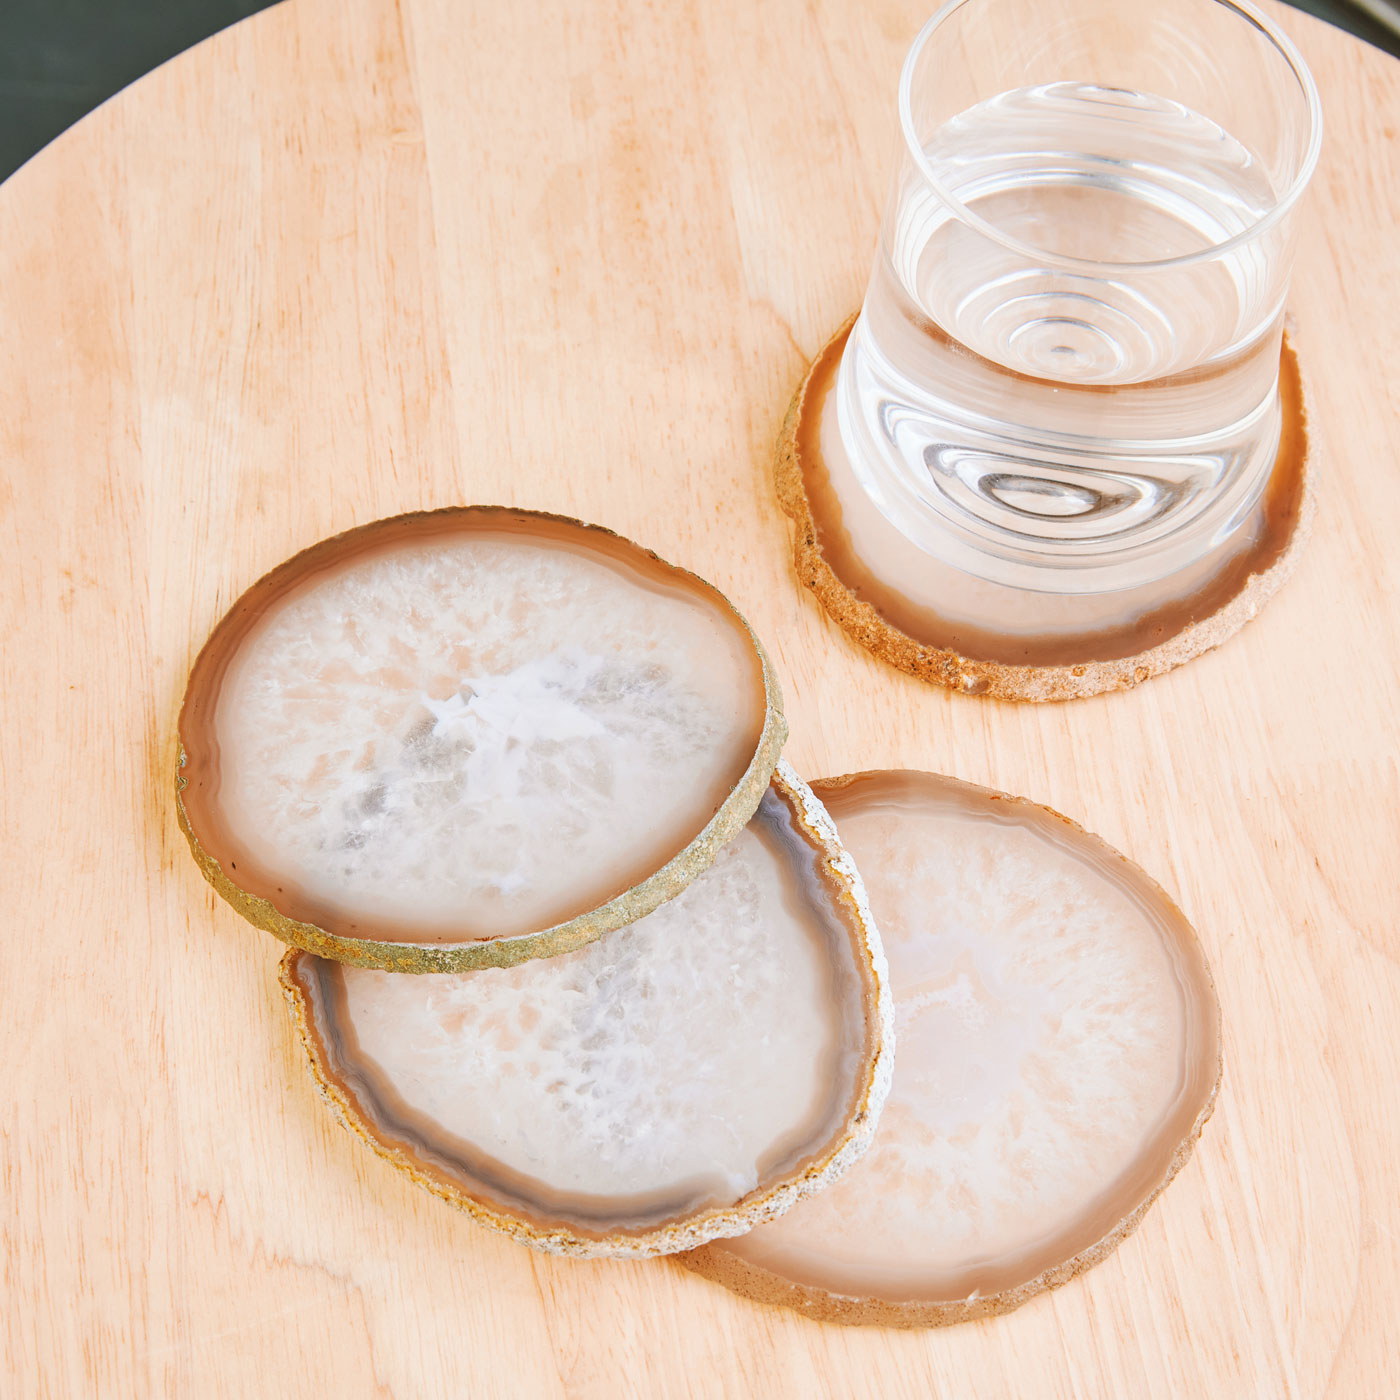 Set of 4 Natural Brazilian Agate Drink Coasters with Wood Holder - Natural